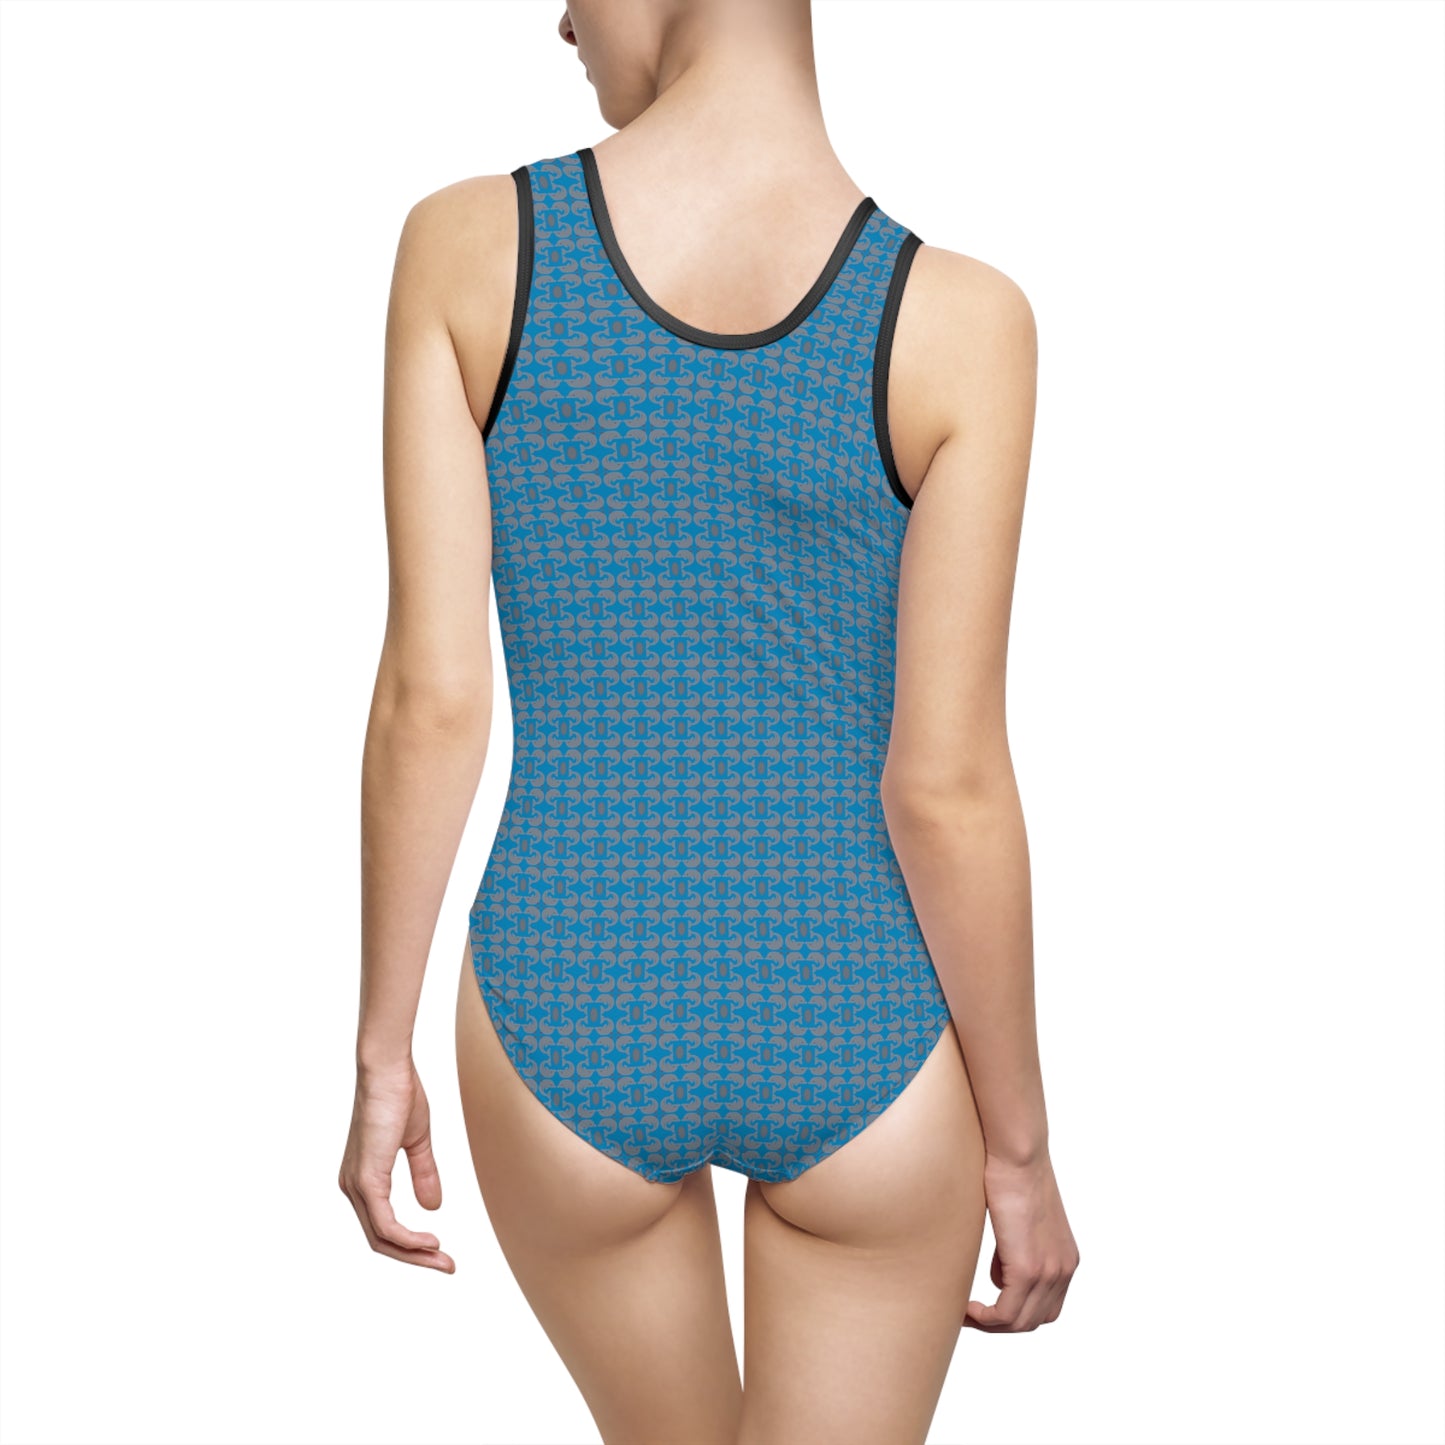 Playful Dolphins - Blue 00b3ff - Women's Classic One-Piece Swimsuit